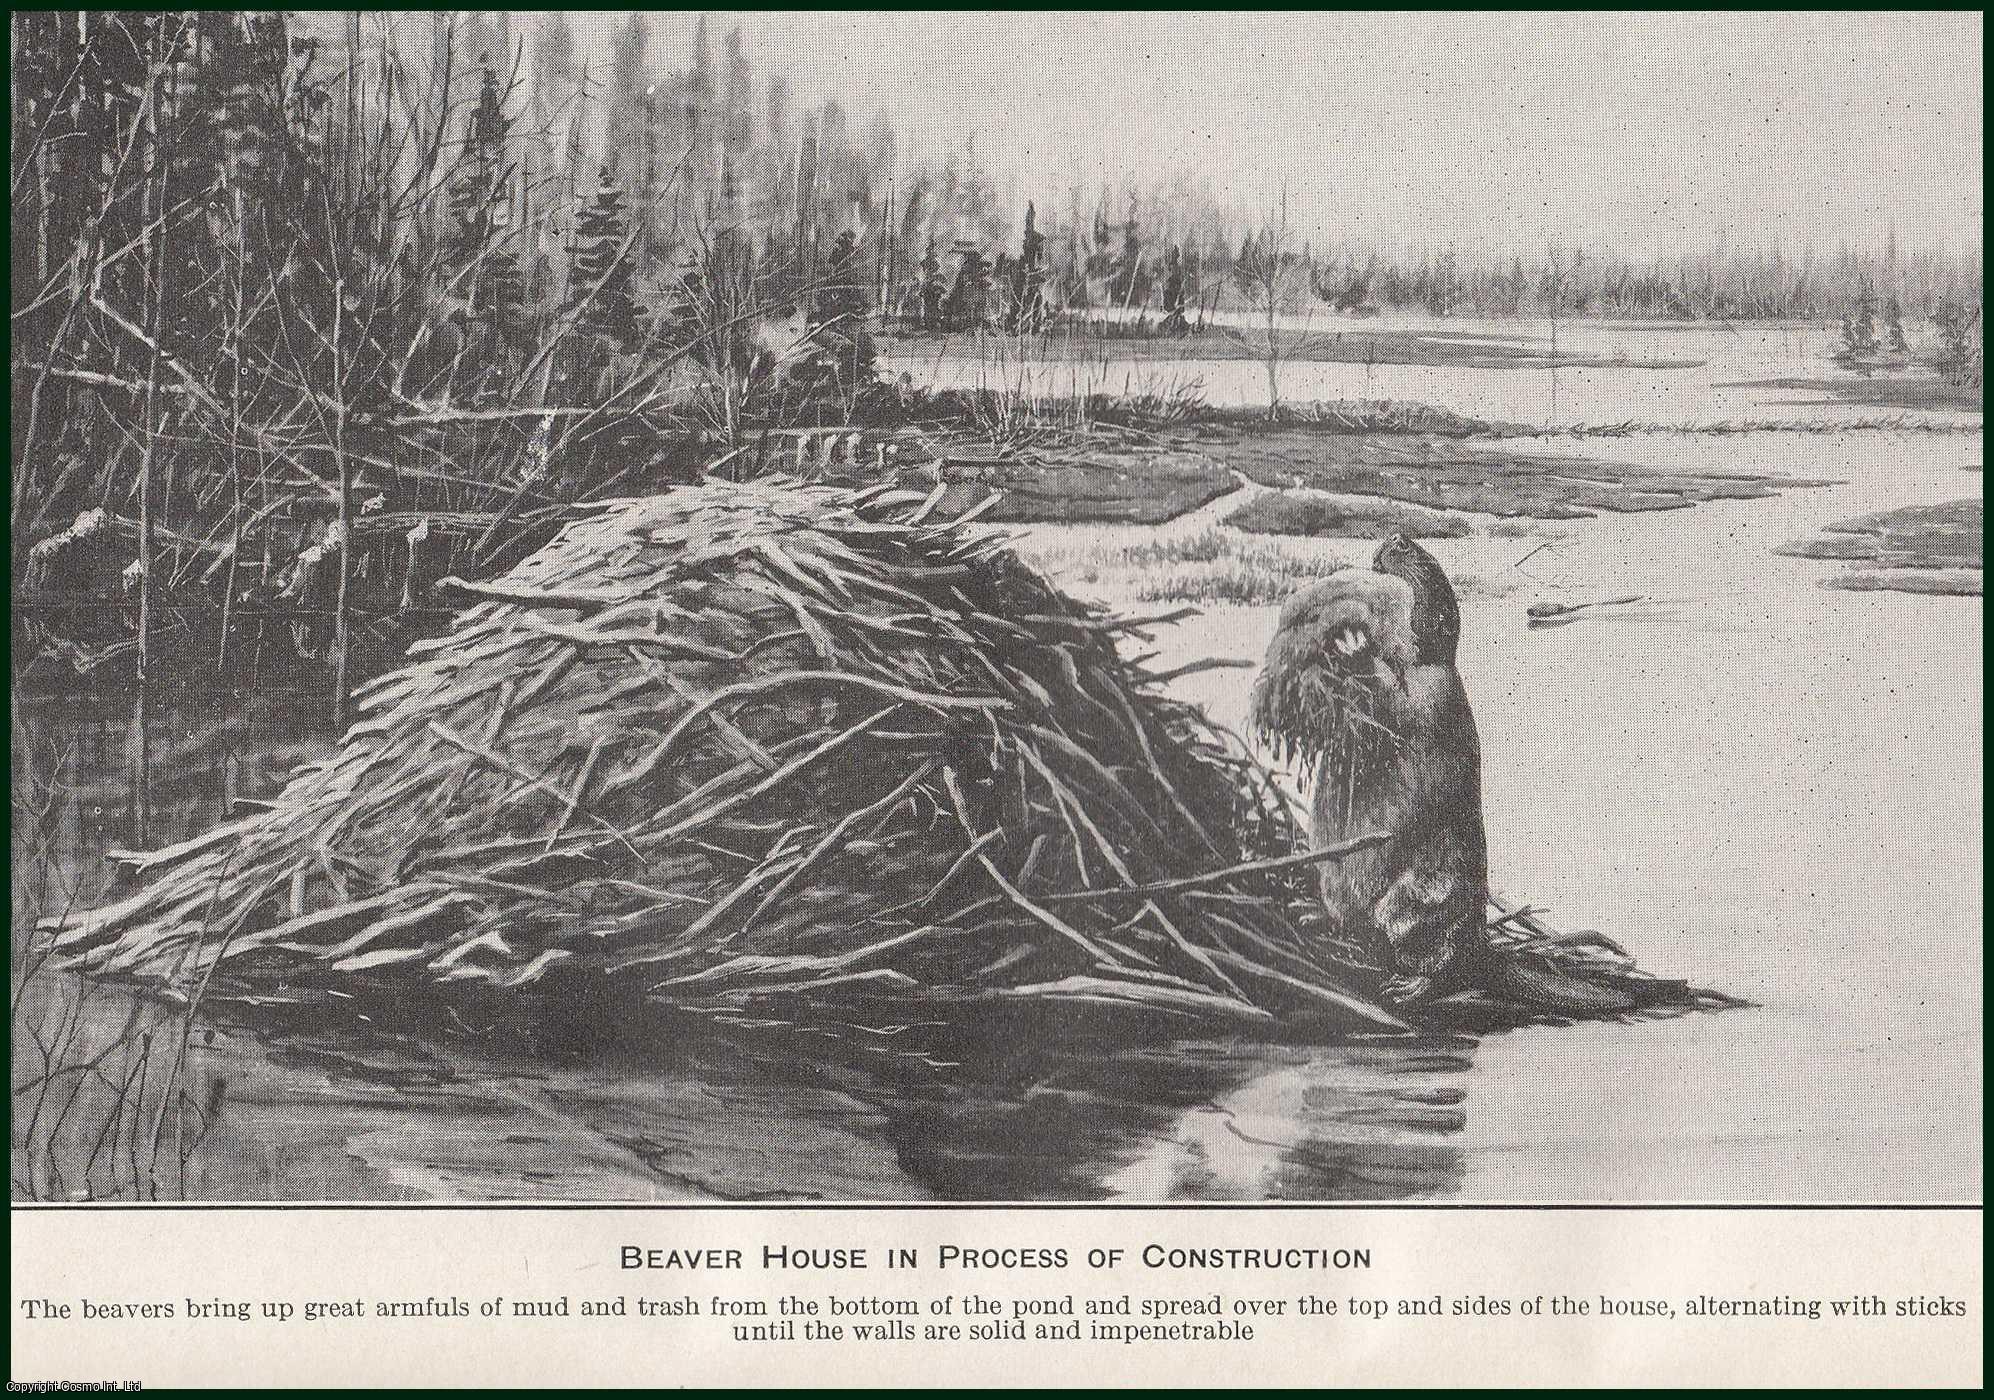 Vernon Bailey - How Beavers Build Their Houses. An original article from the Report of the Smithsonian Institution, 1926.